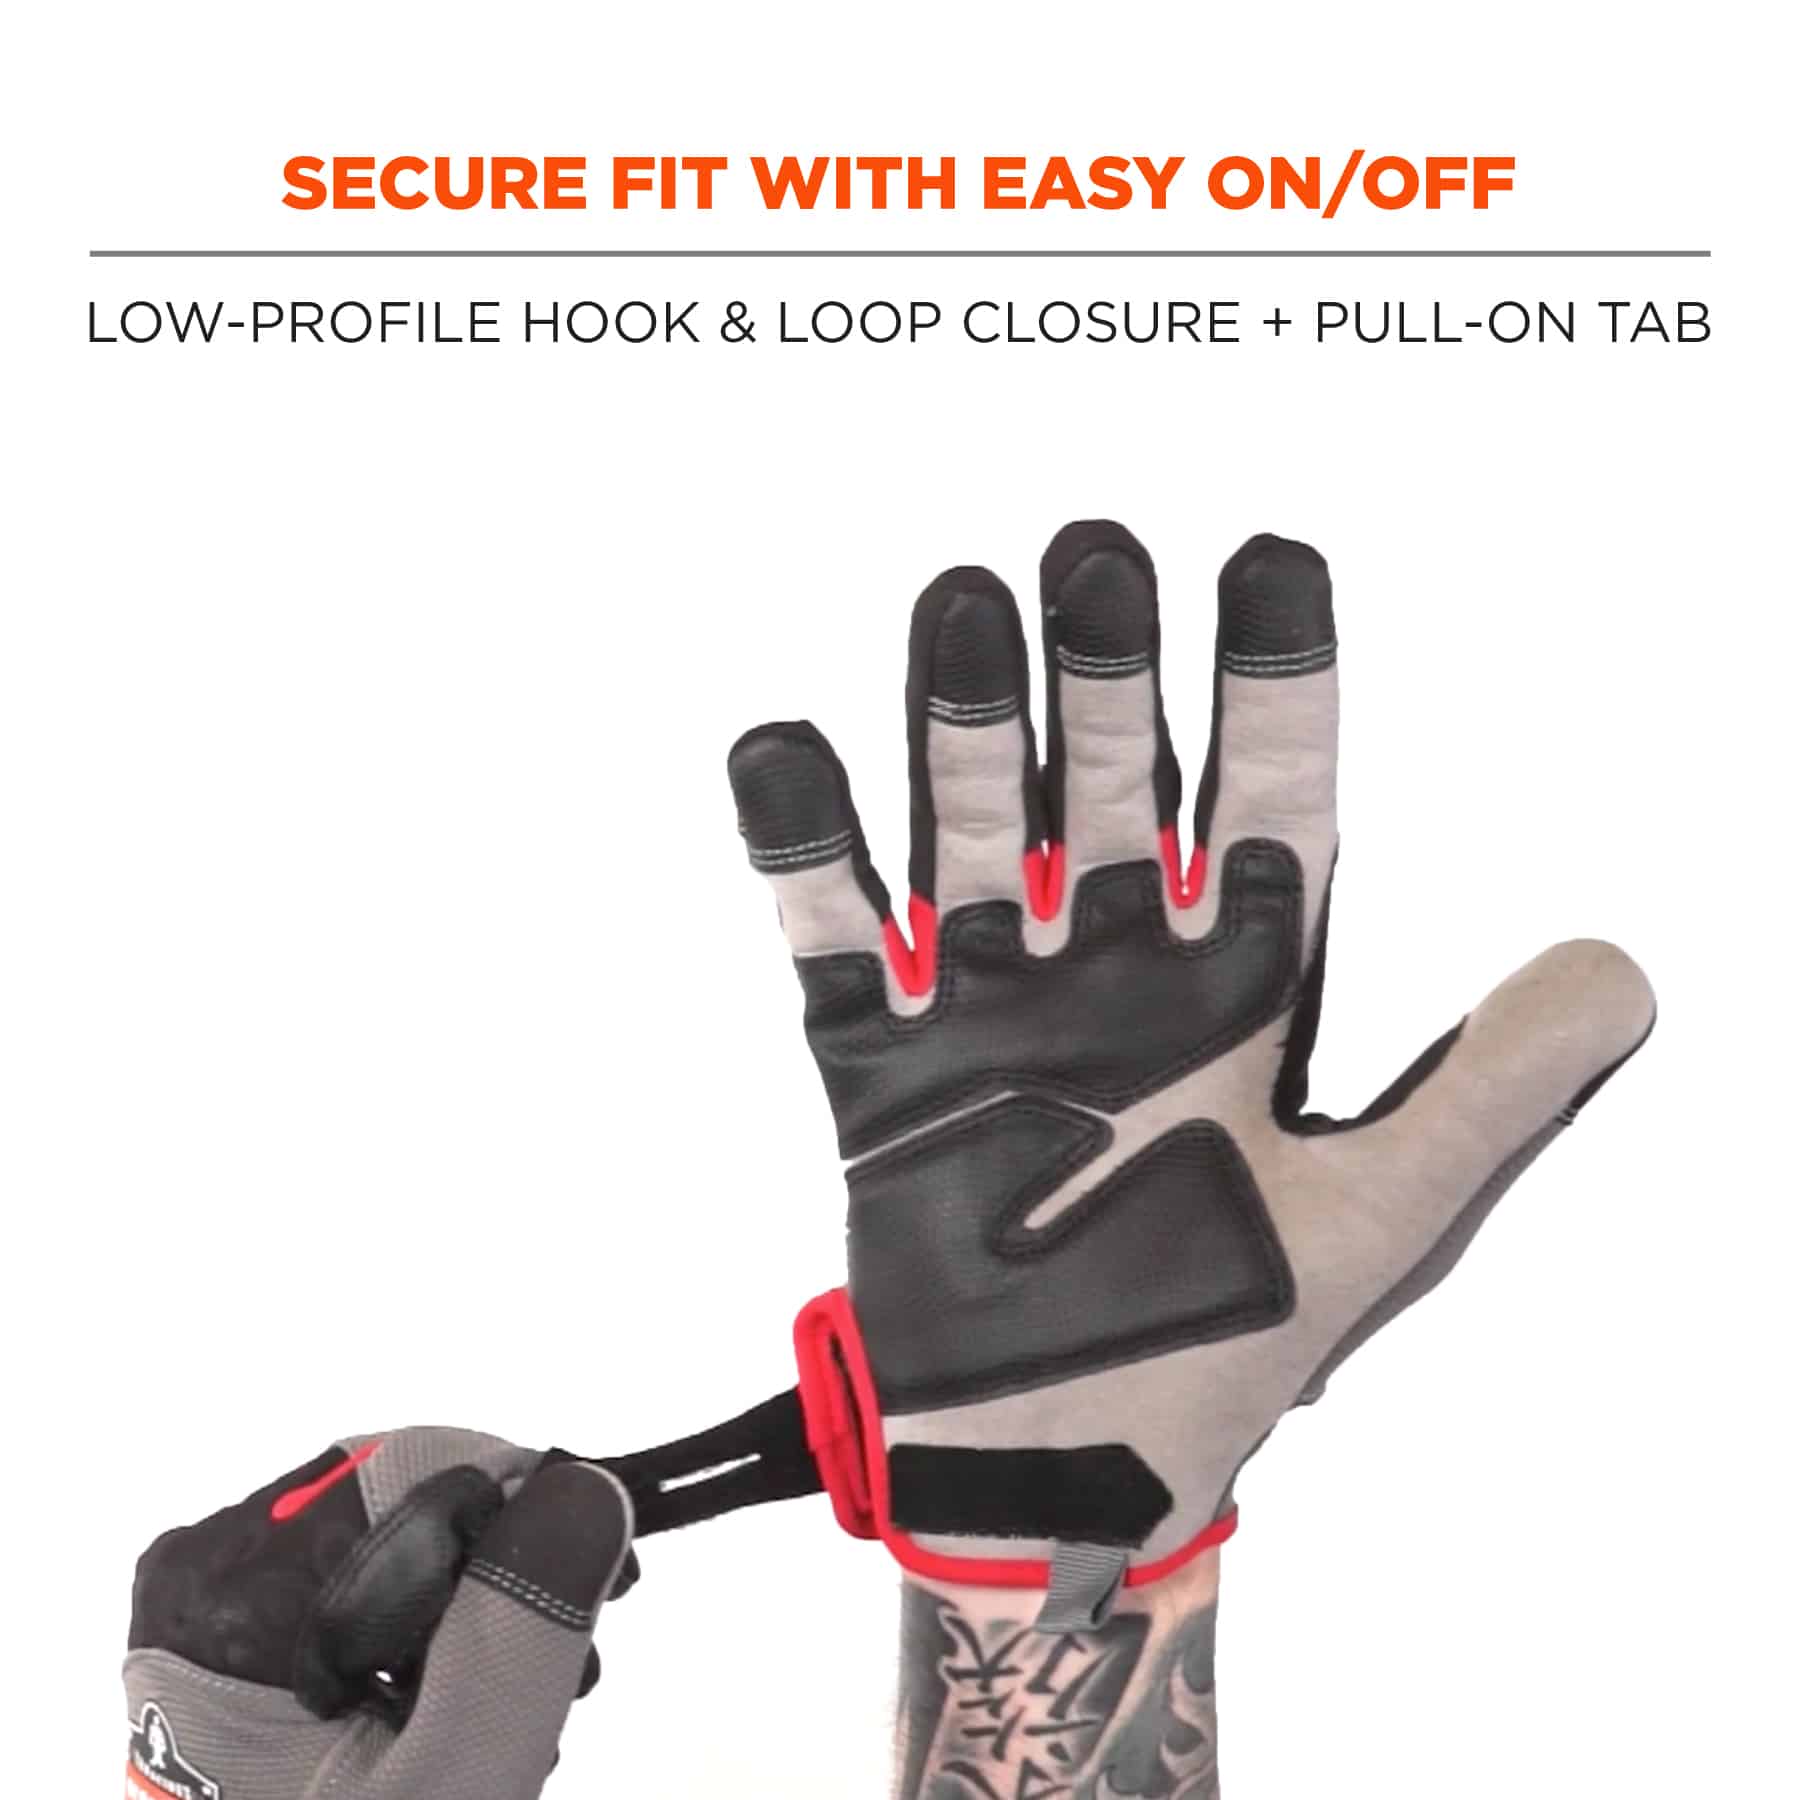 https://www.ergodyne.com/sites/default/files/product-images/17122-710cr-heavy-duty-cut-resistance-gloves-secure-fit-with-easy-on-off.jpg